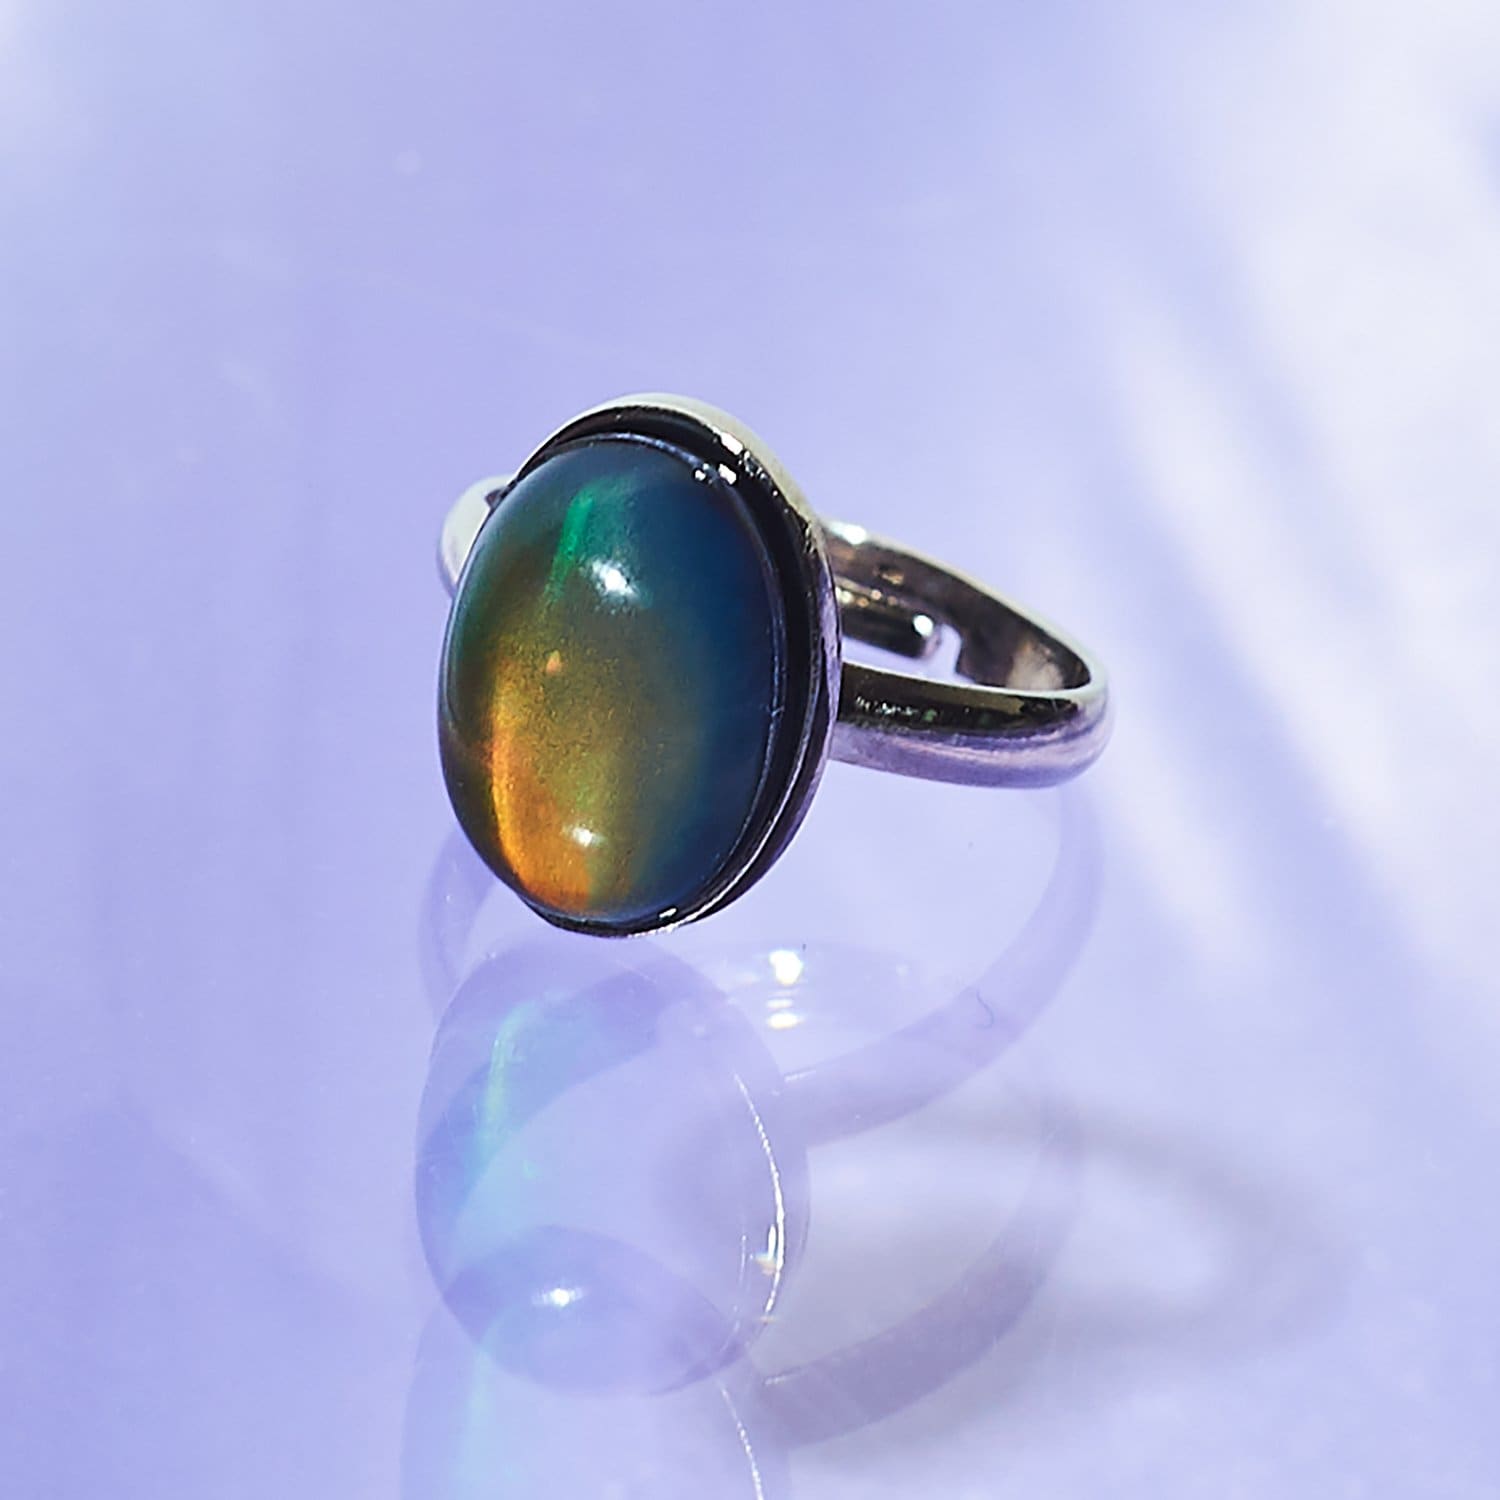 Dolphin Mood Ring – Best Mood Rings